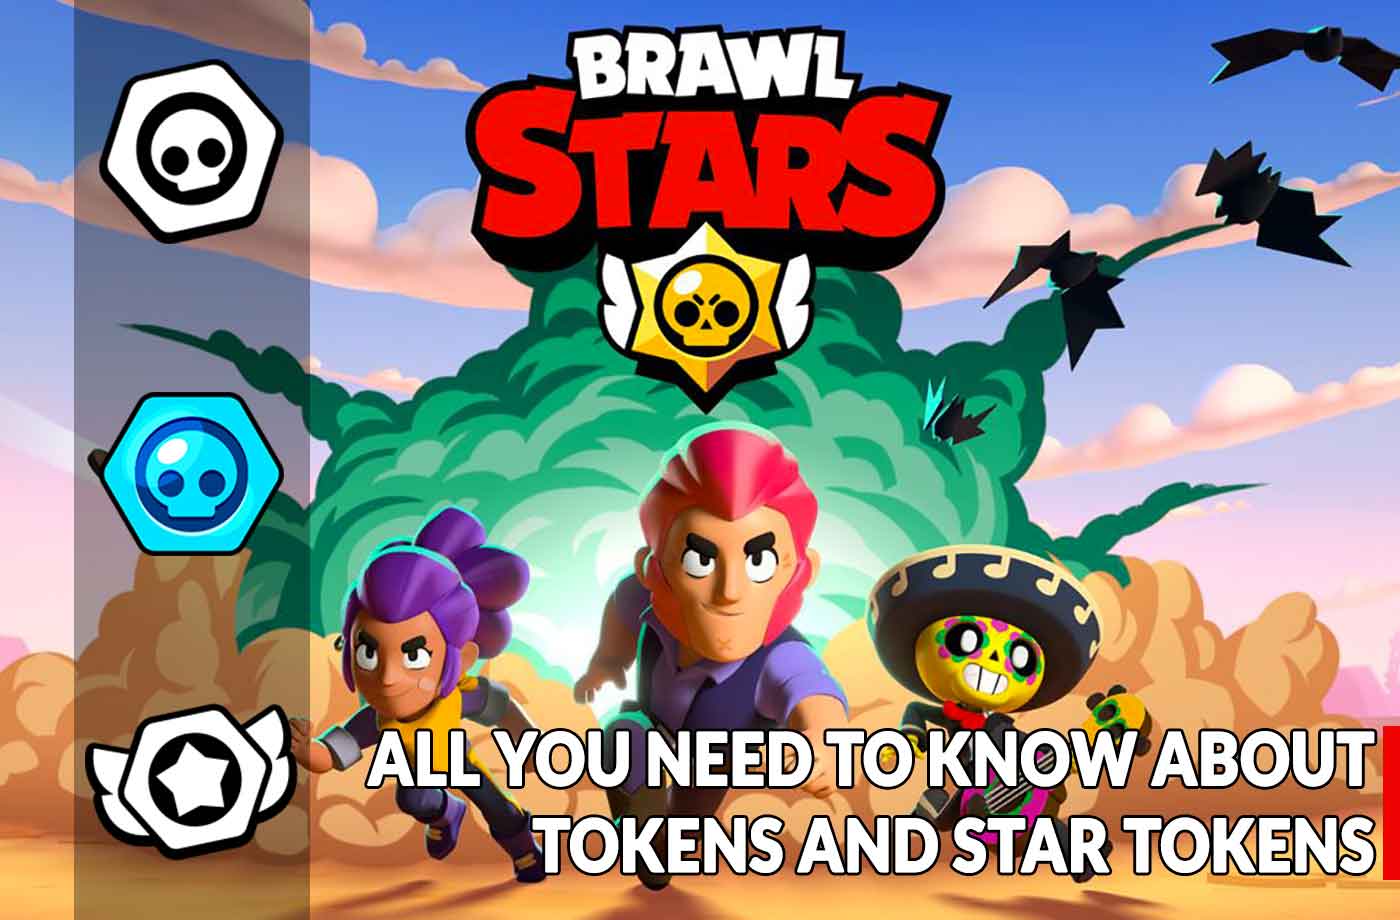 Guide Brawl Stars How To Quickly Gain Tokens And Star Tokens Kill The Game - joueur de brawl star